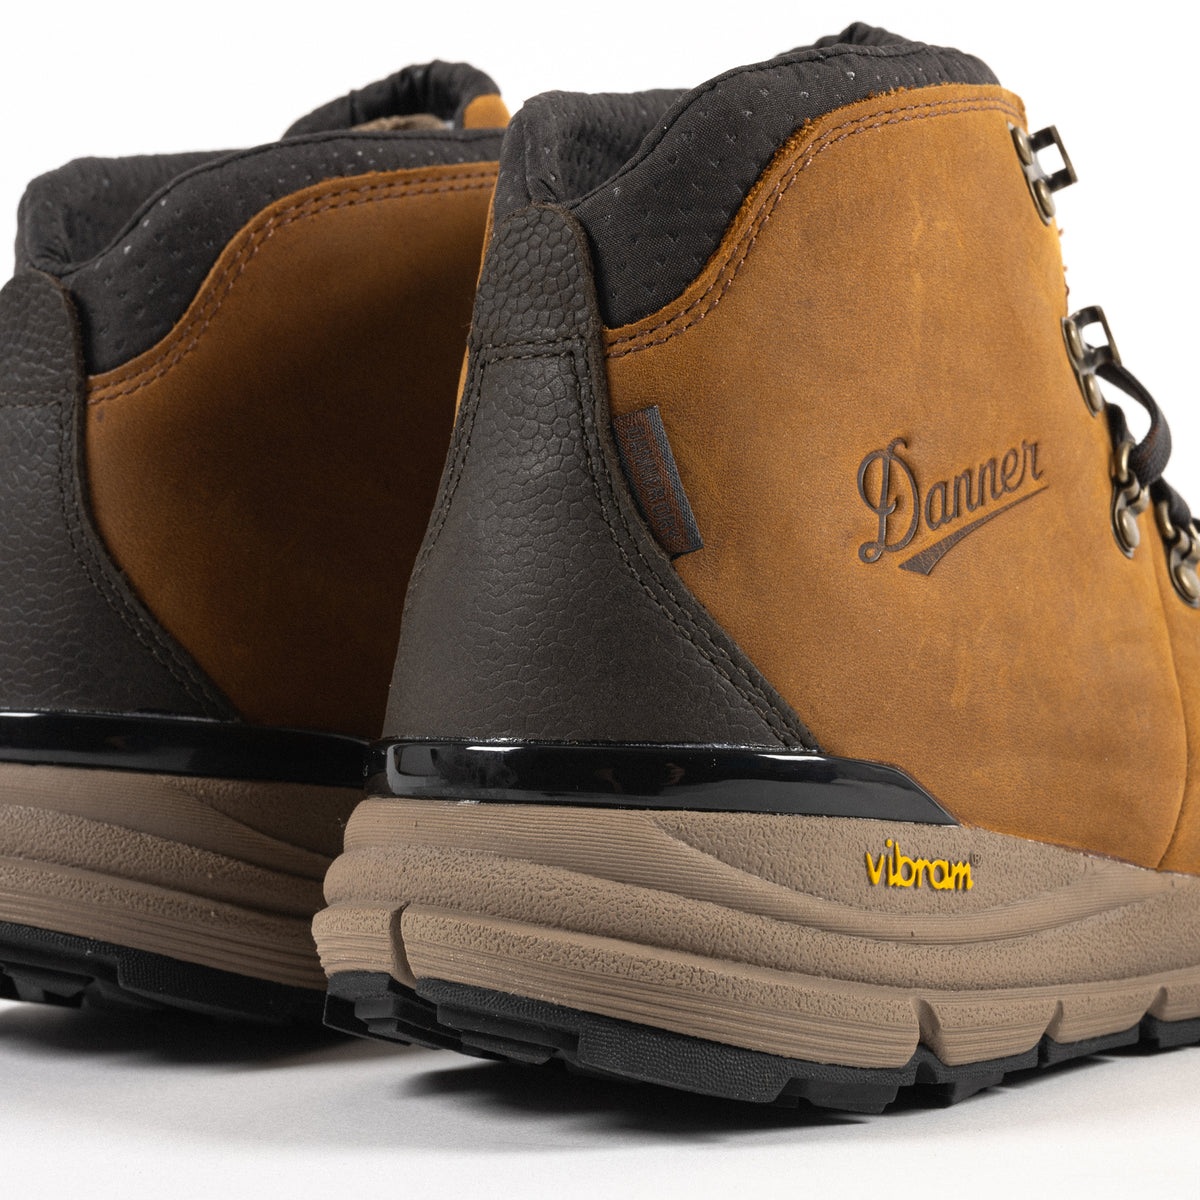 MOUNTAIN 600 - RICH BROWN - LEATHER